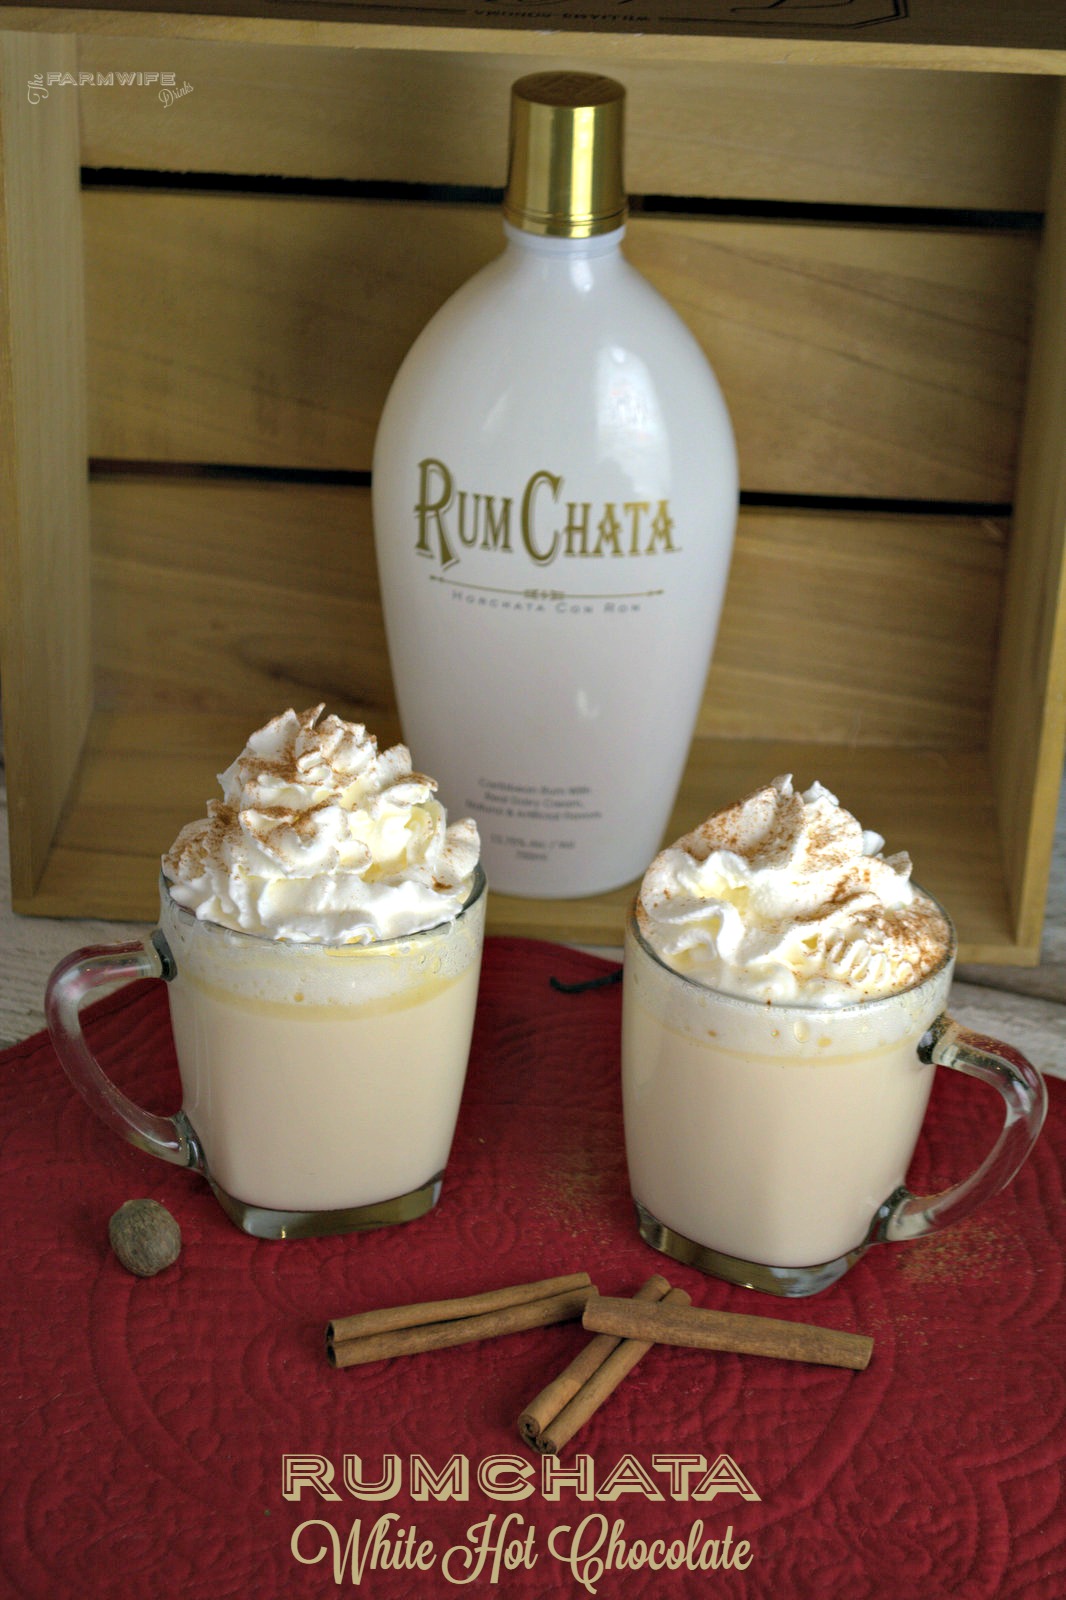 Crock Pot Rumchata White Hot Chocolate is by far the richest, most decadent white hot chocolate I have ever had. Don't want booze in your white hot chocolate, no problem. Just don't add it.